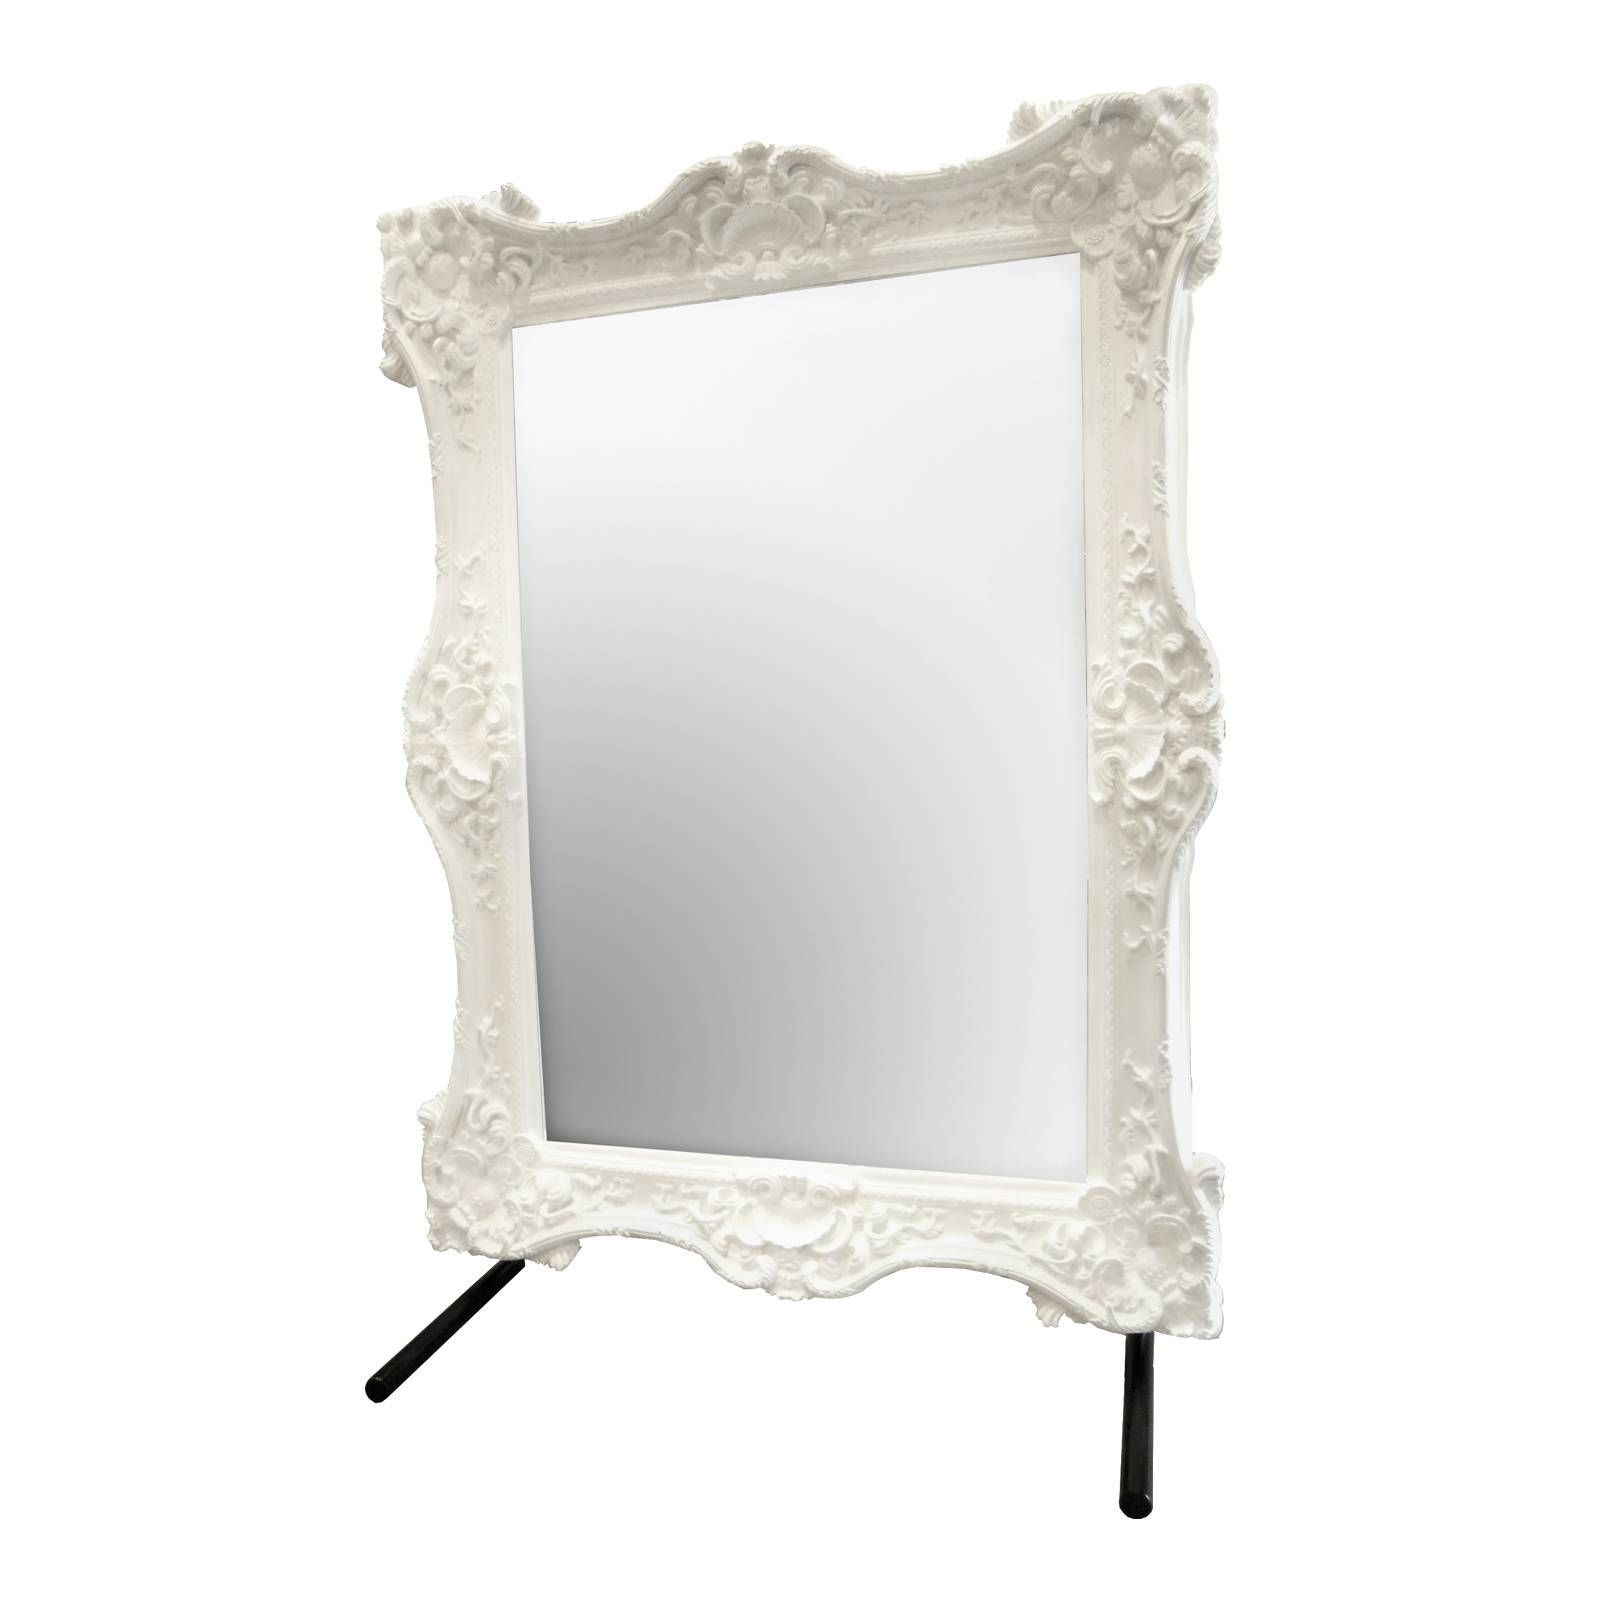 Bathroom: Astounding Baroque Mirror With Unique Frame For Bathroom Inside White Baroque Wall Mirrors (Photo 25 of 25)